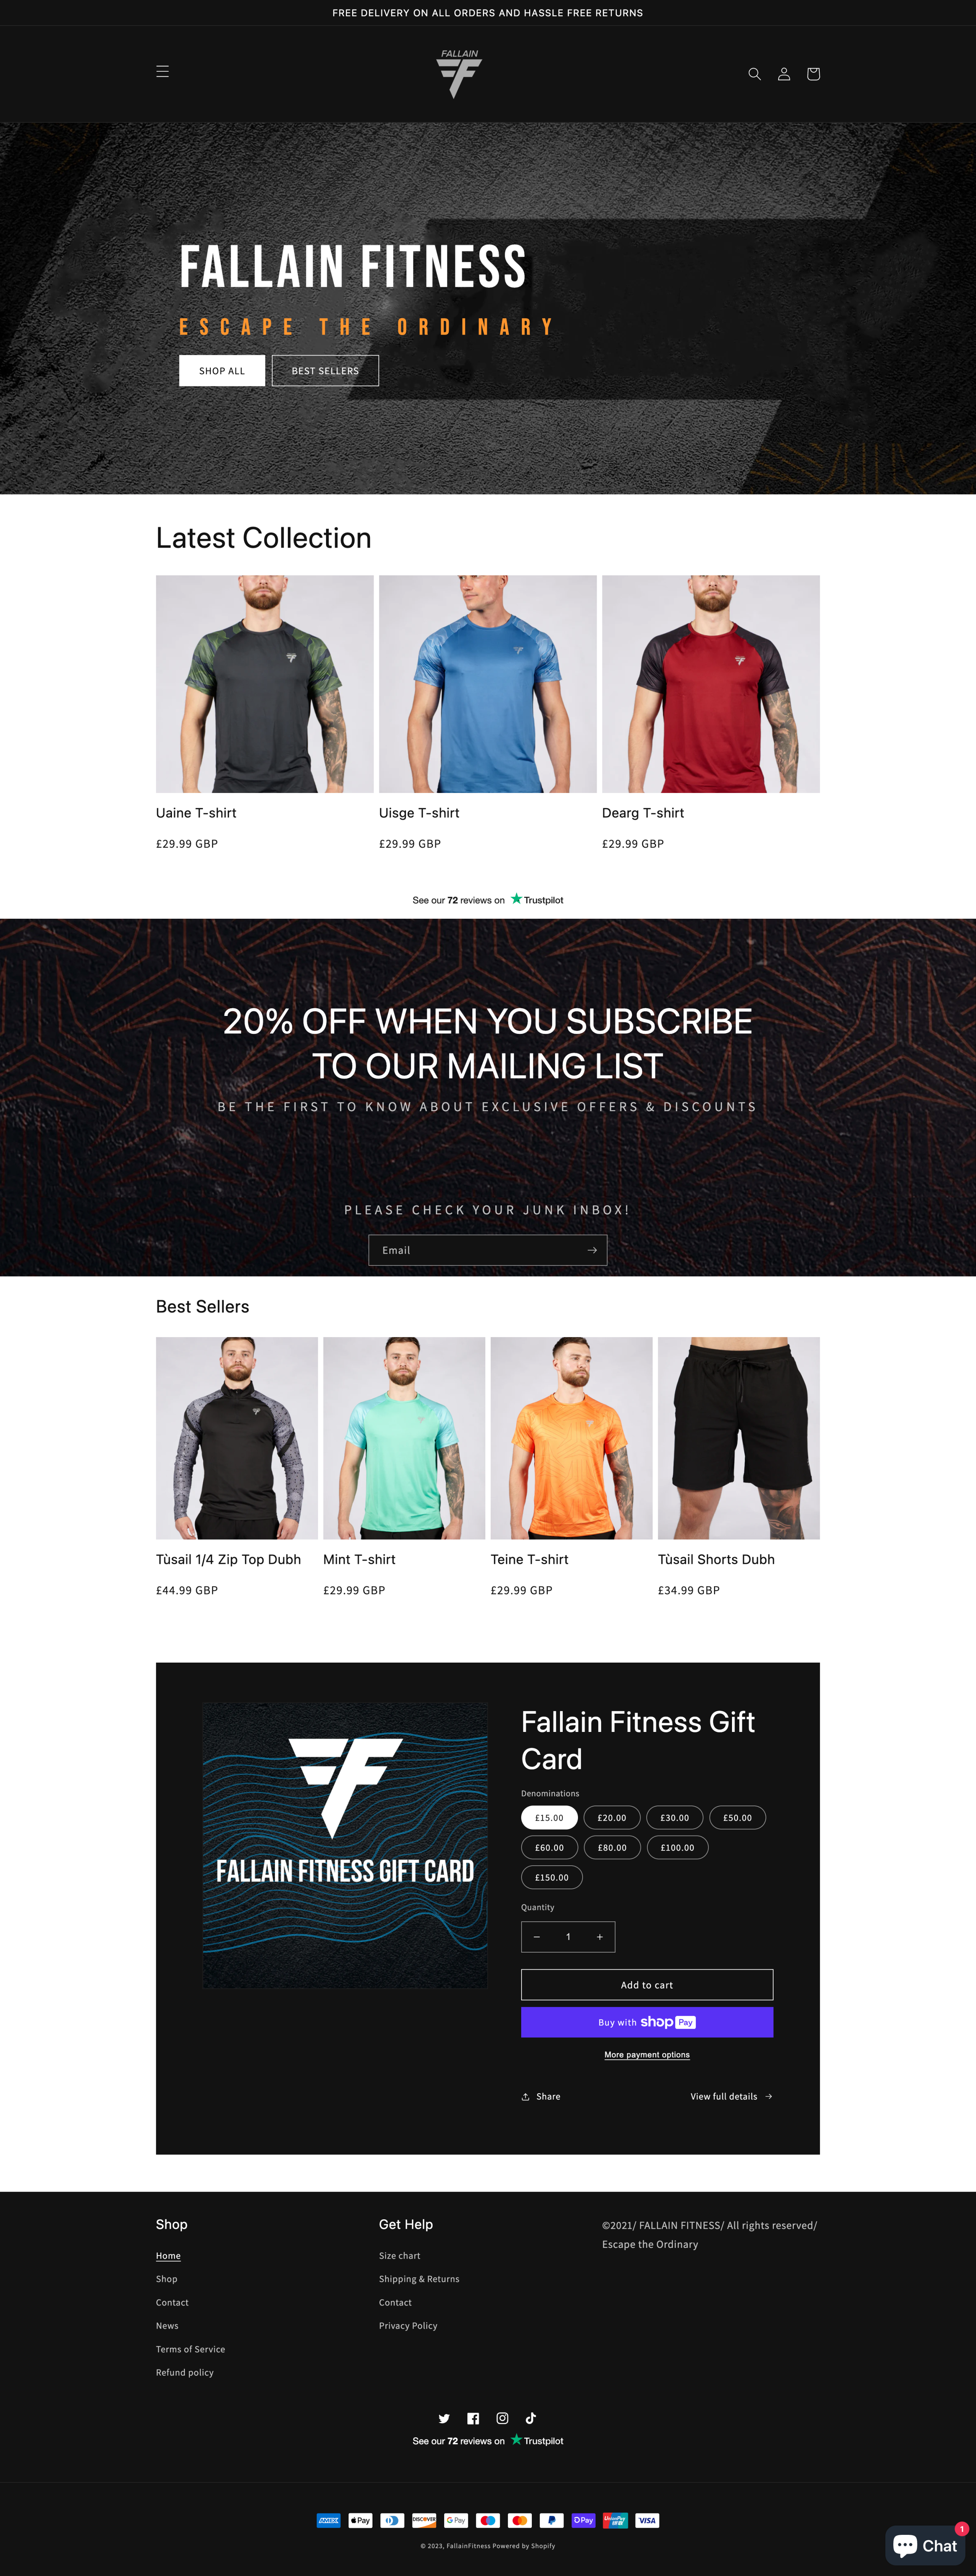 screenshot of the fallain fitness website selling men's gym clothes